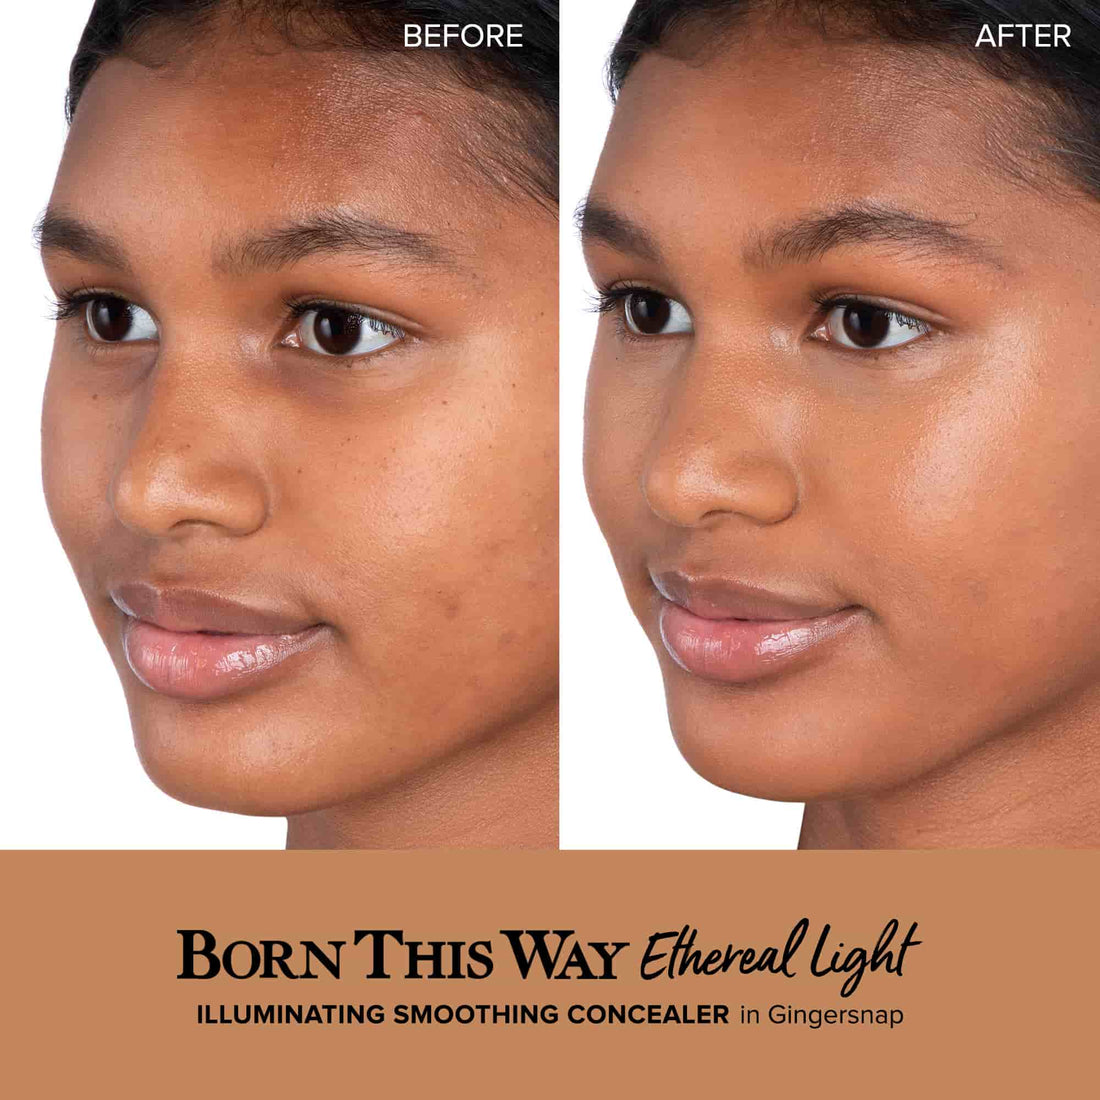 Born This Way Ethereal Light Illuminating Smoothing Concealer/ Gingersnap - Too Faced.